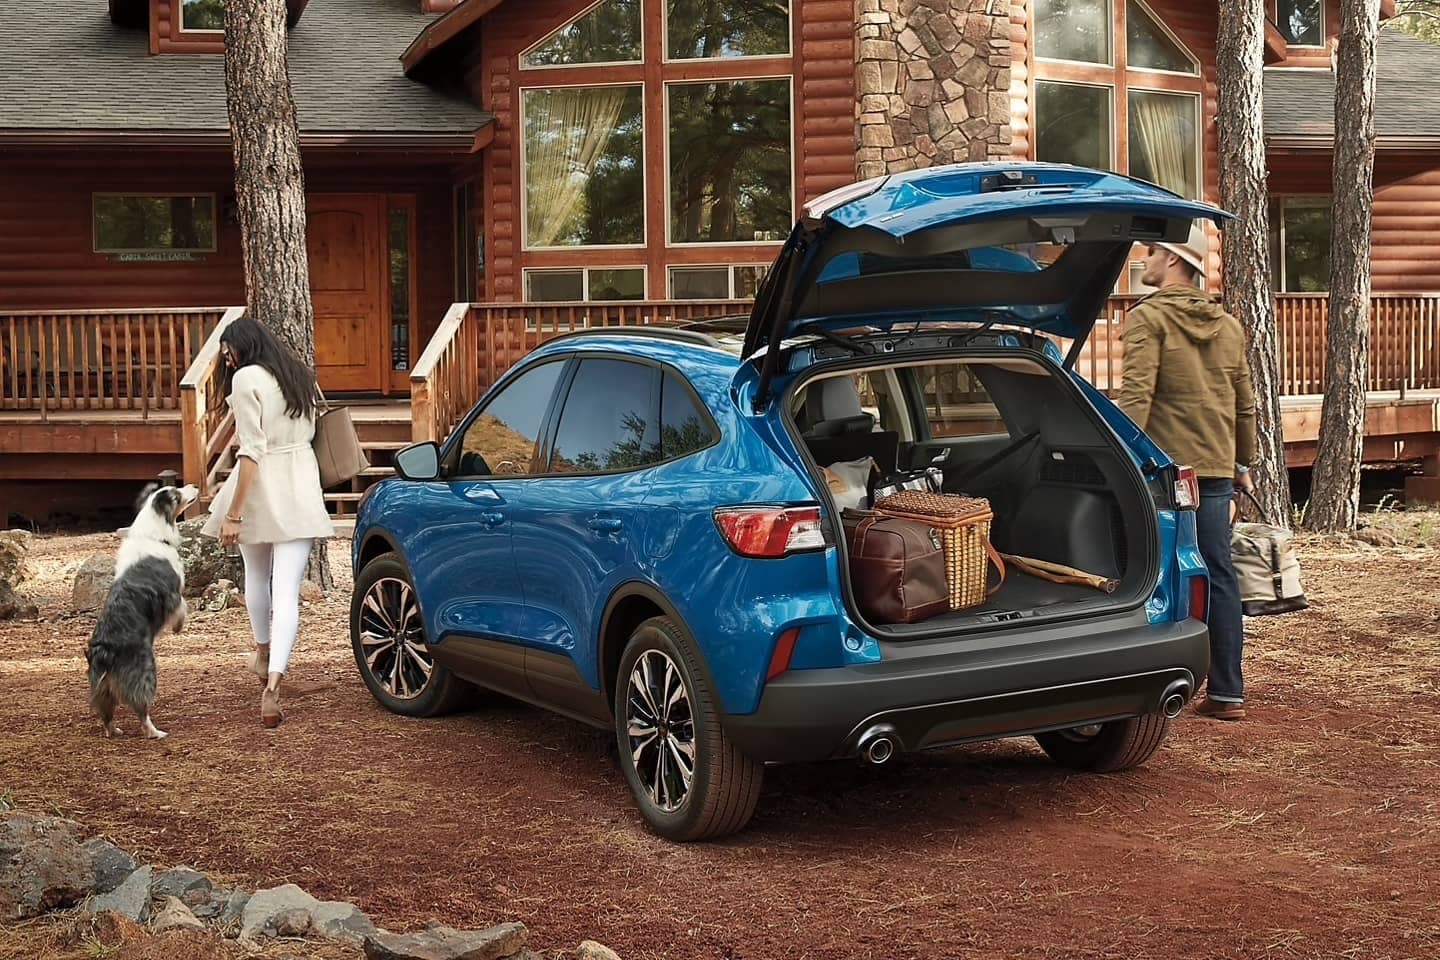 A Ford Crossover in velocity blue parked in front of a log cabin with trunk door open to show luggage.